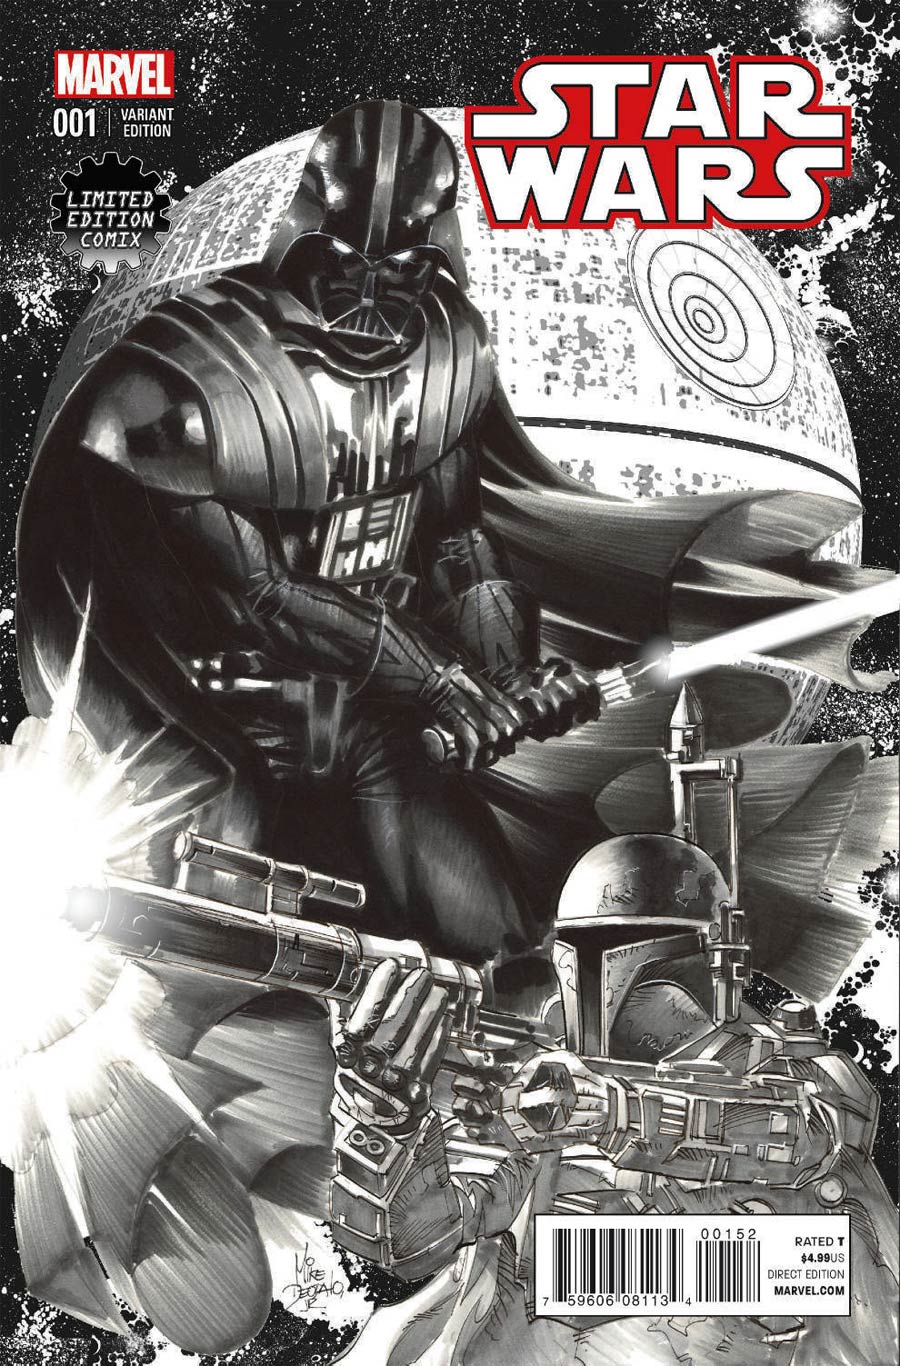 Star Wars Vol 4 #1 Cover E Limited Edition Comix Exclusive Mike Deodato Black & White Variant Cover